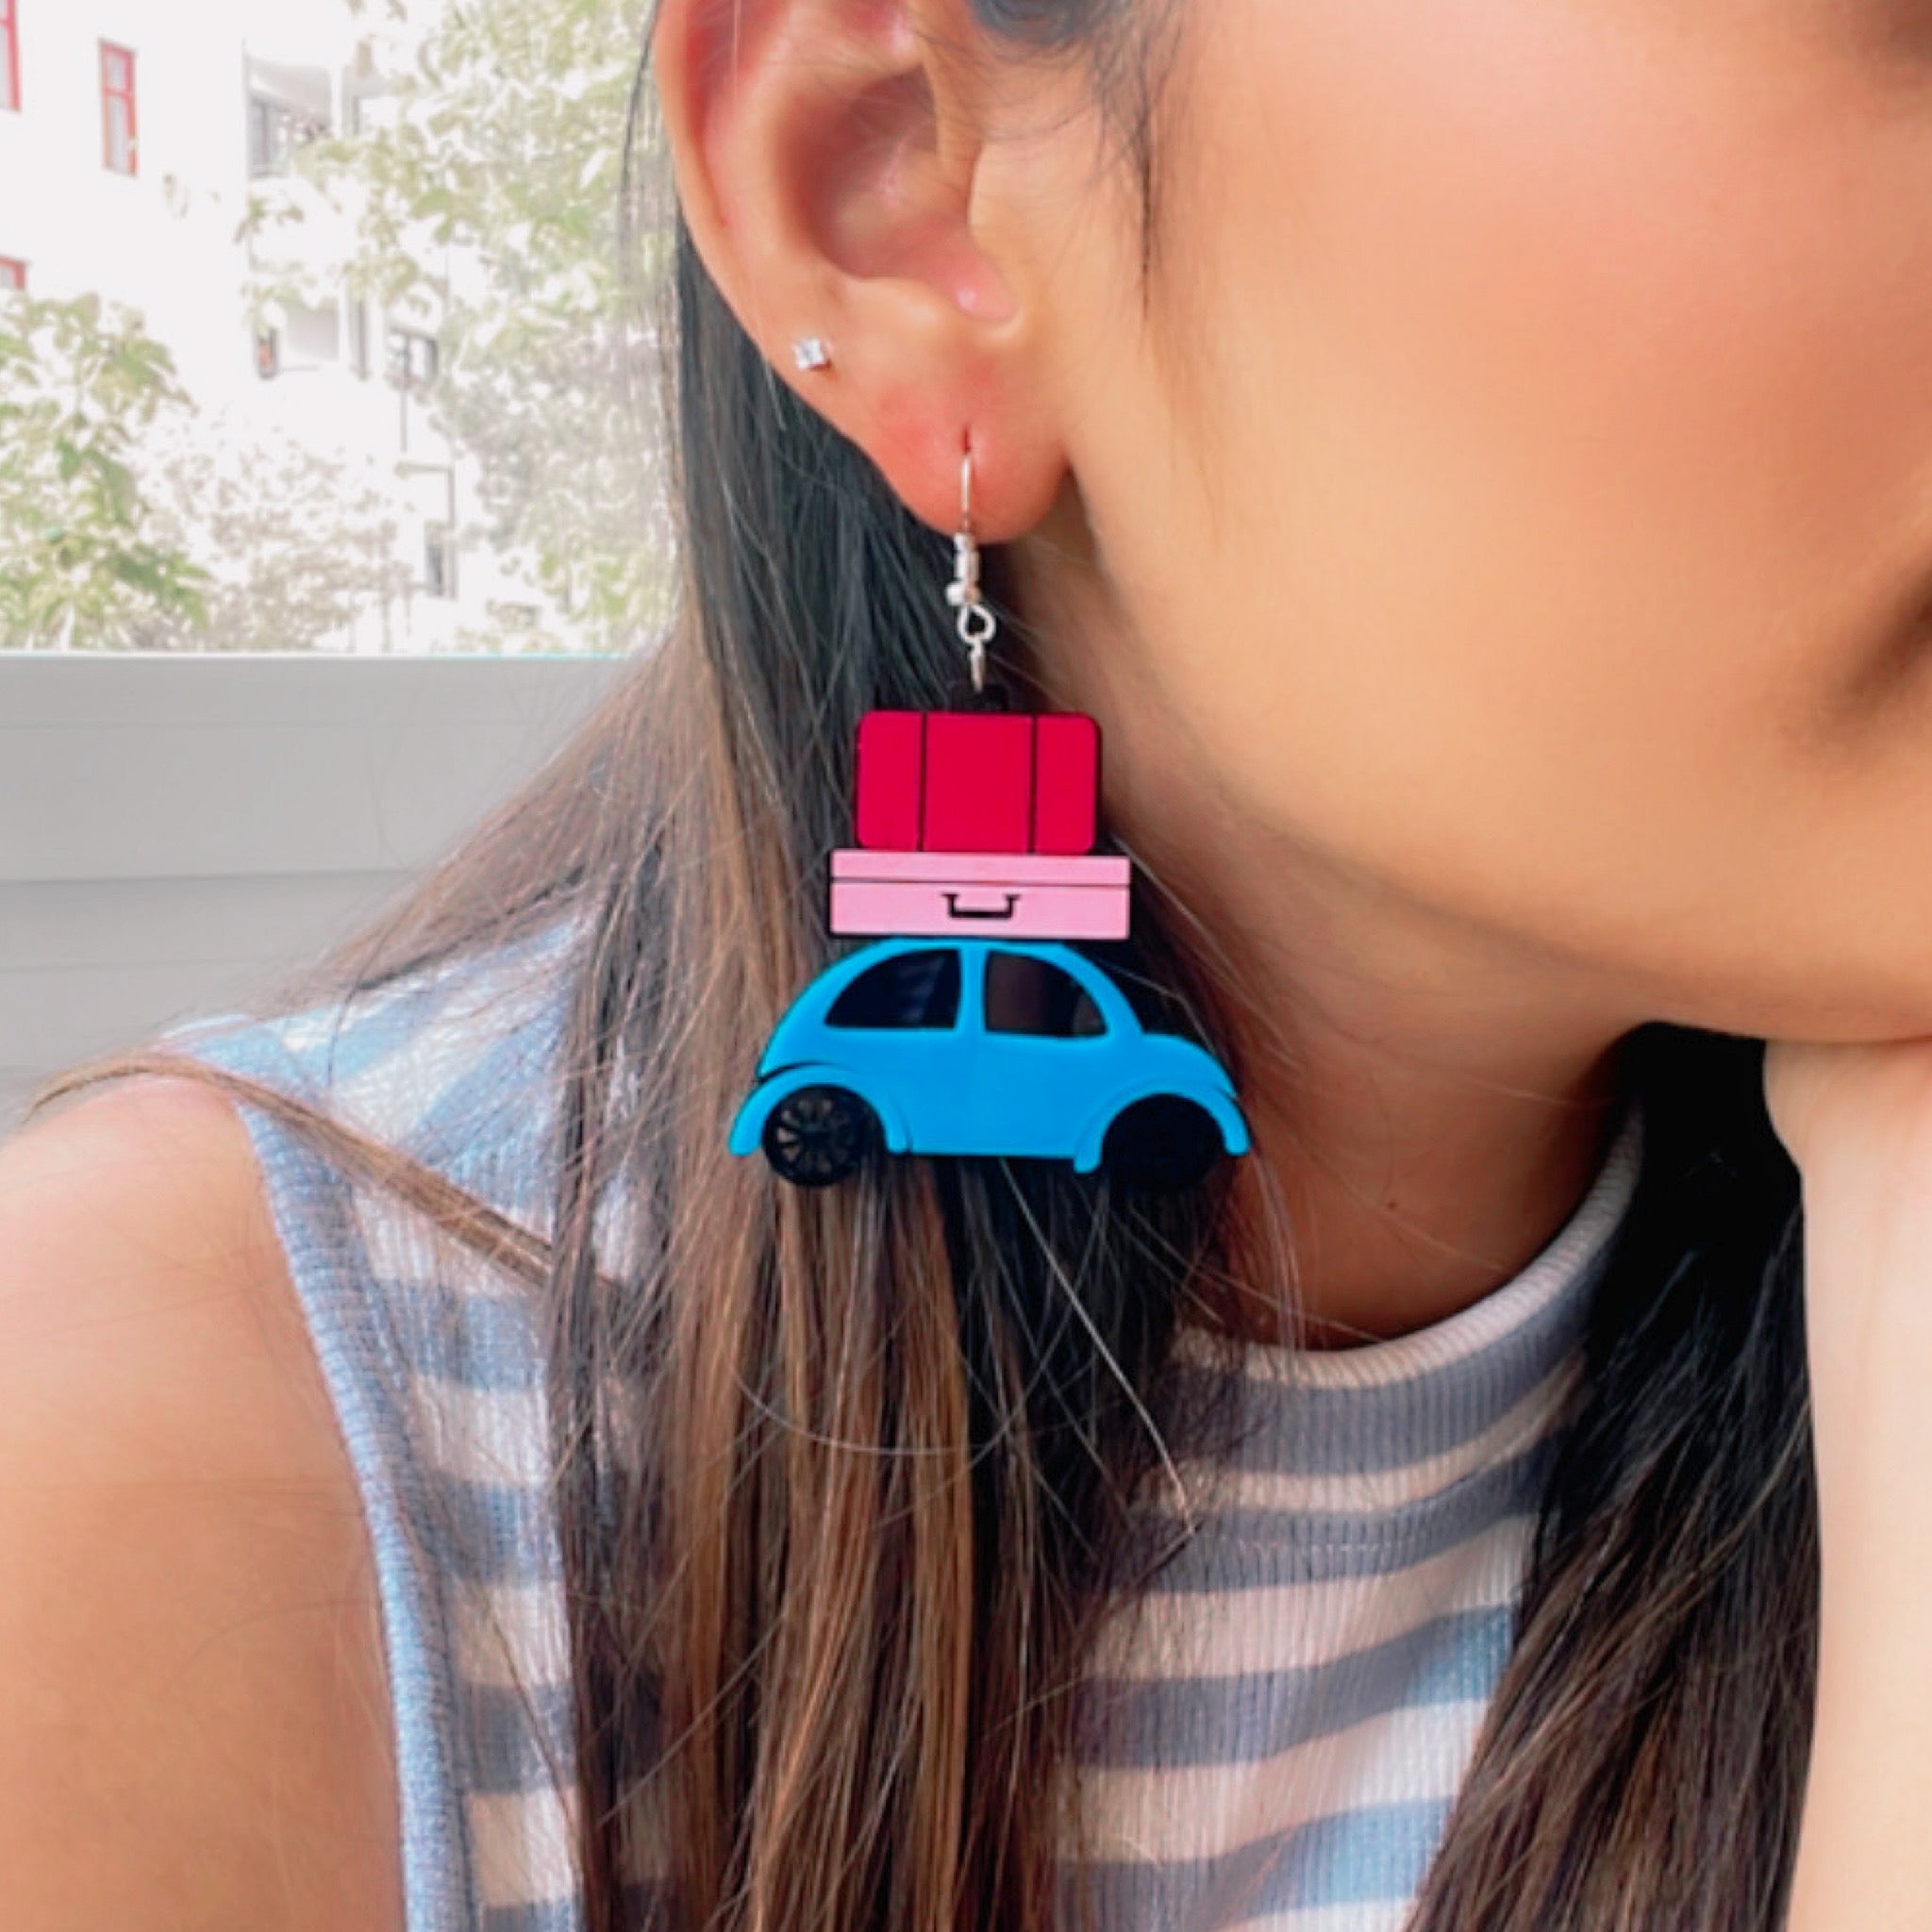 Happy Journey Earrings - Multicolor - Blue, Baby Pink, Dark Pink, Black - Nian by Nidhi - worn by a woman